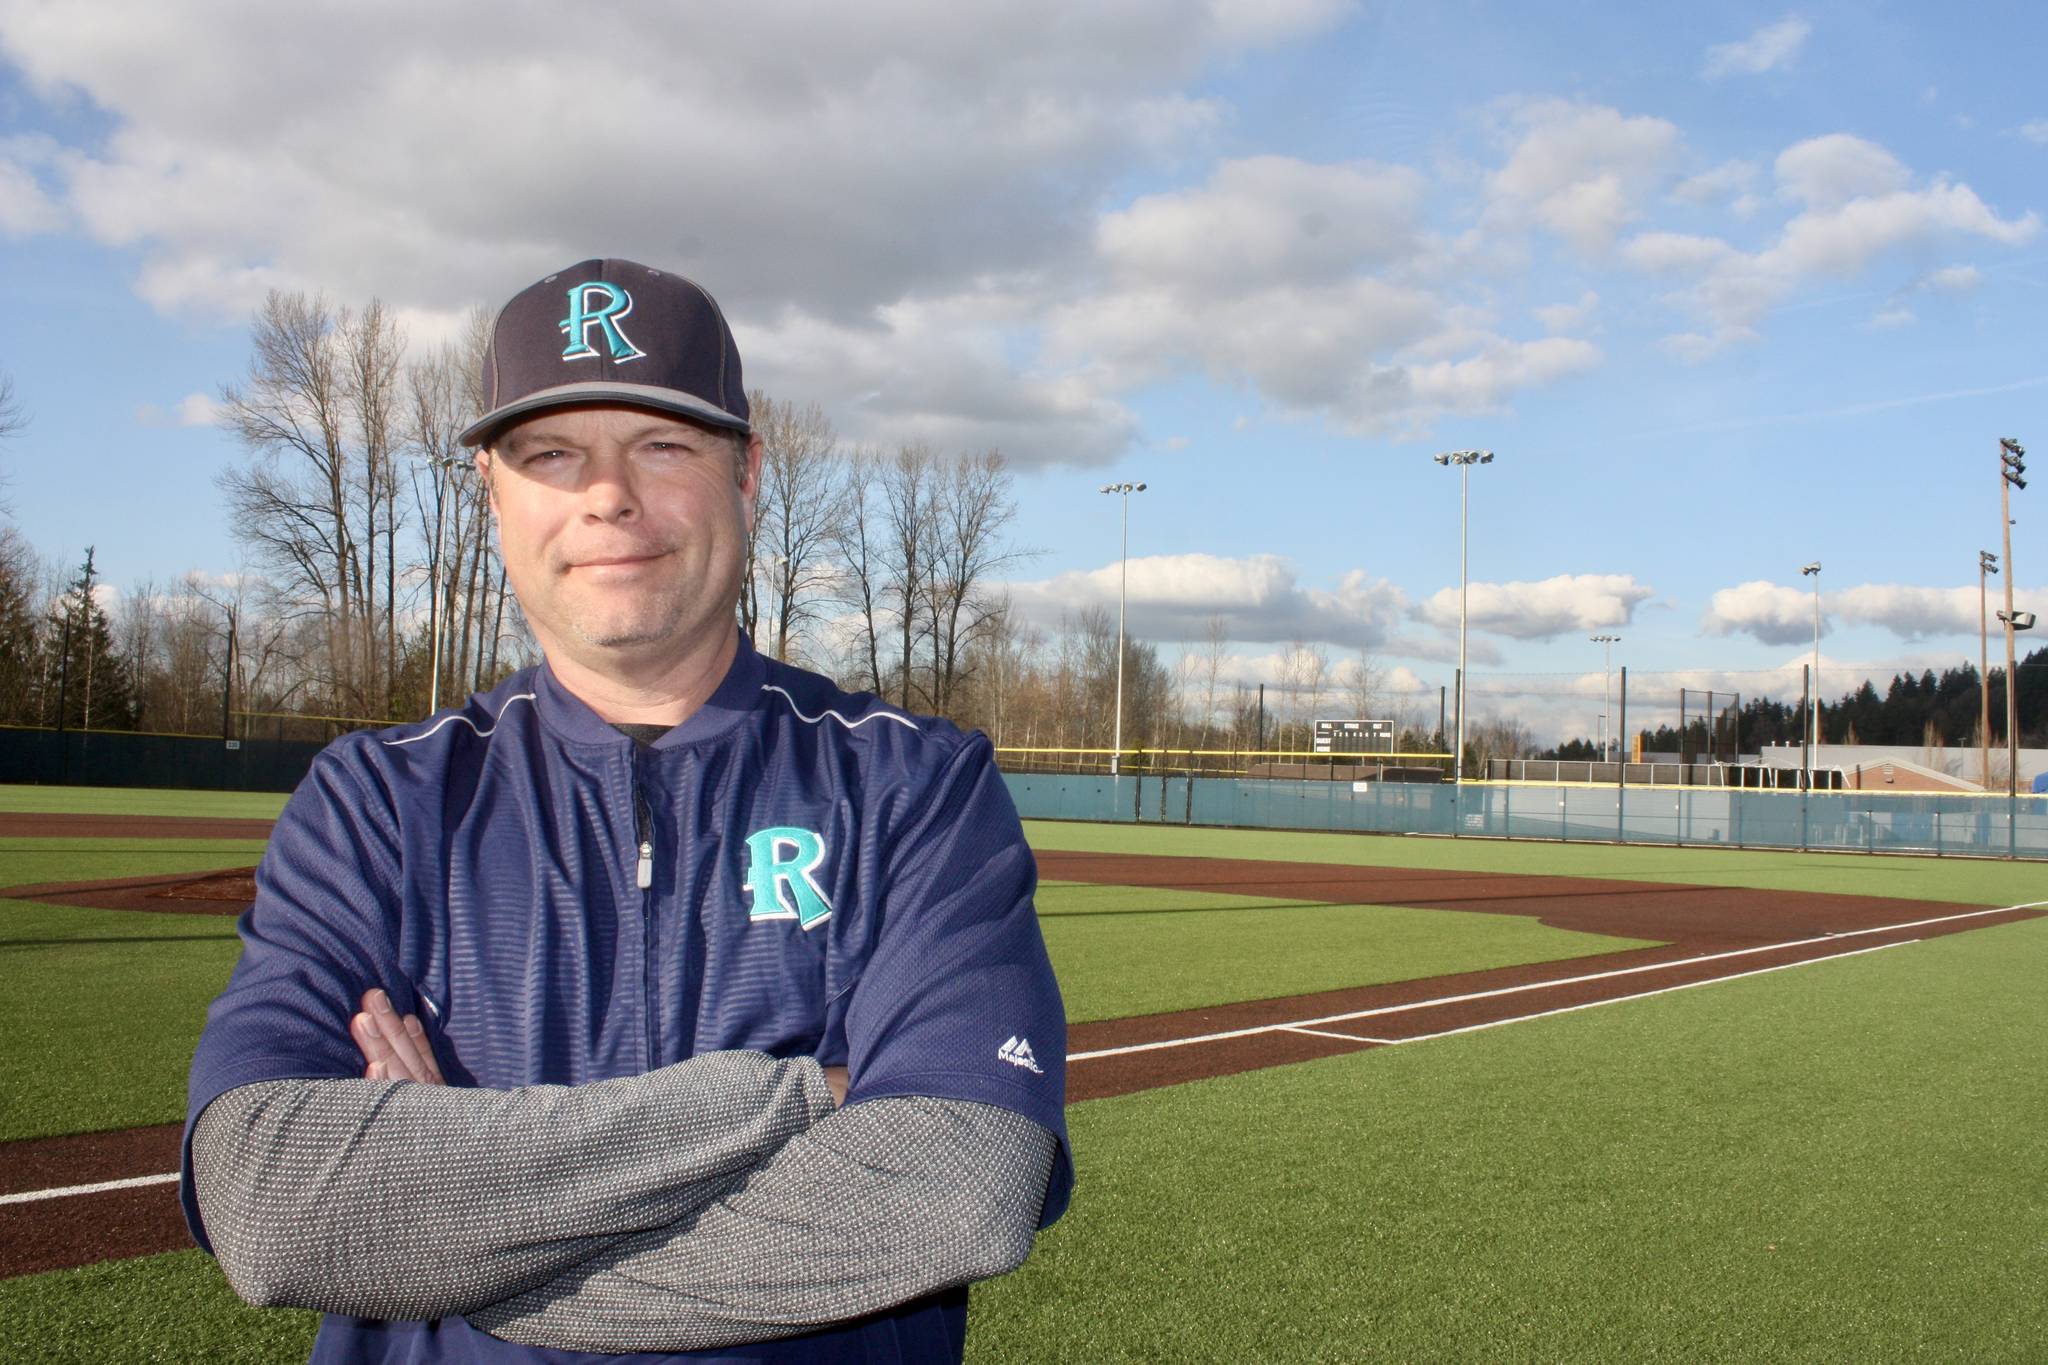 Tim Kuykendall is back in the game as the new baseball coach at Auburn Riverside. Kuykendall and other coaches throughout the region hope the pandemic-delayed spring sports season can safely begin in late April. MARK KLAAS, Auburn Reporter